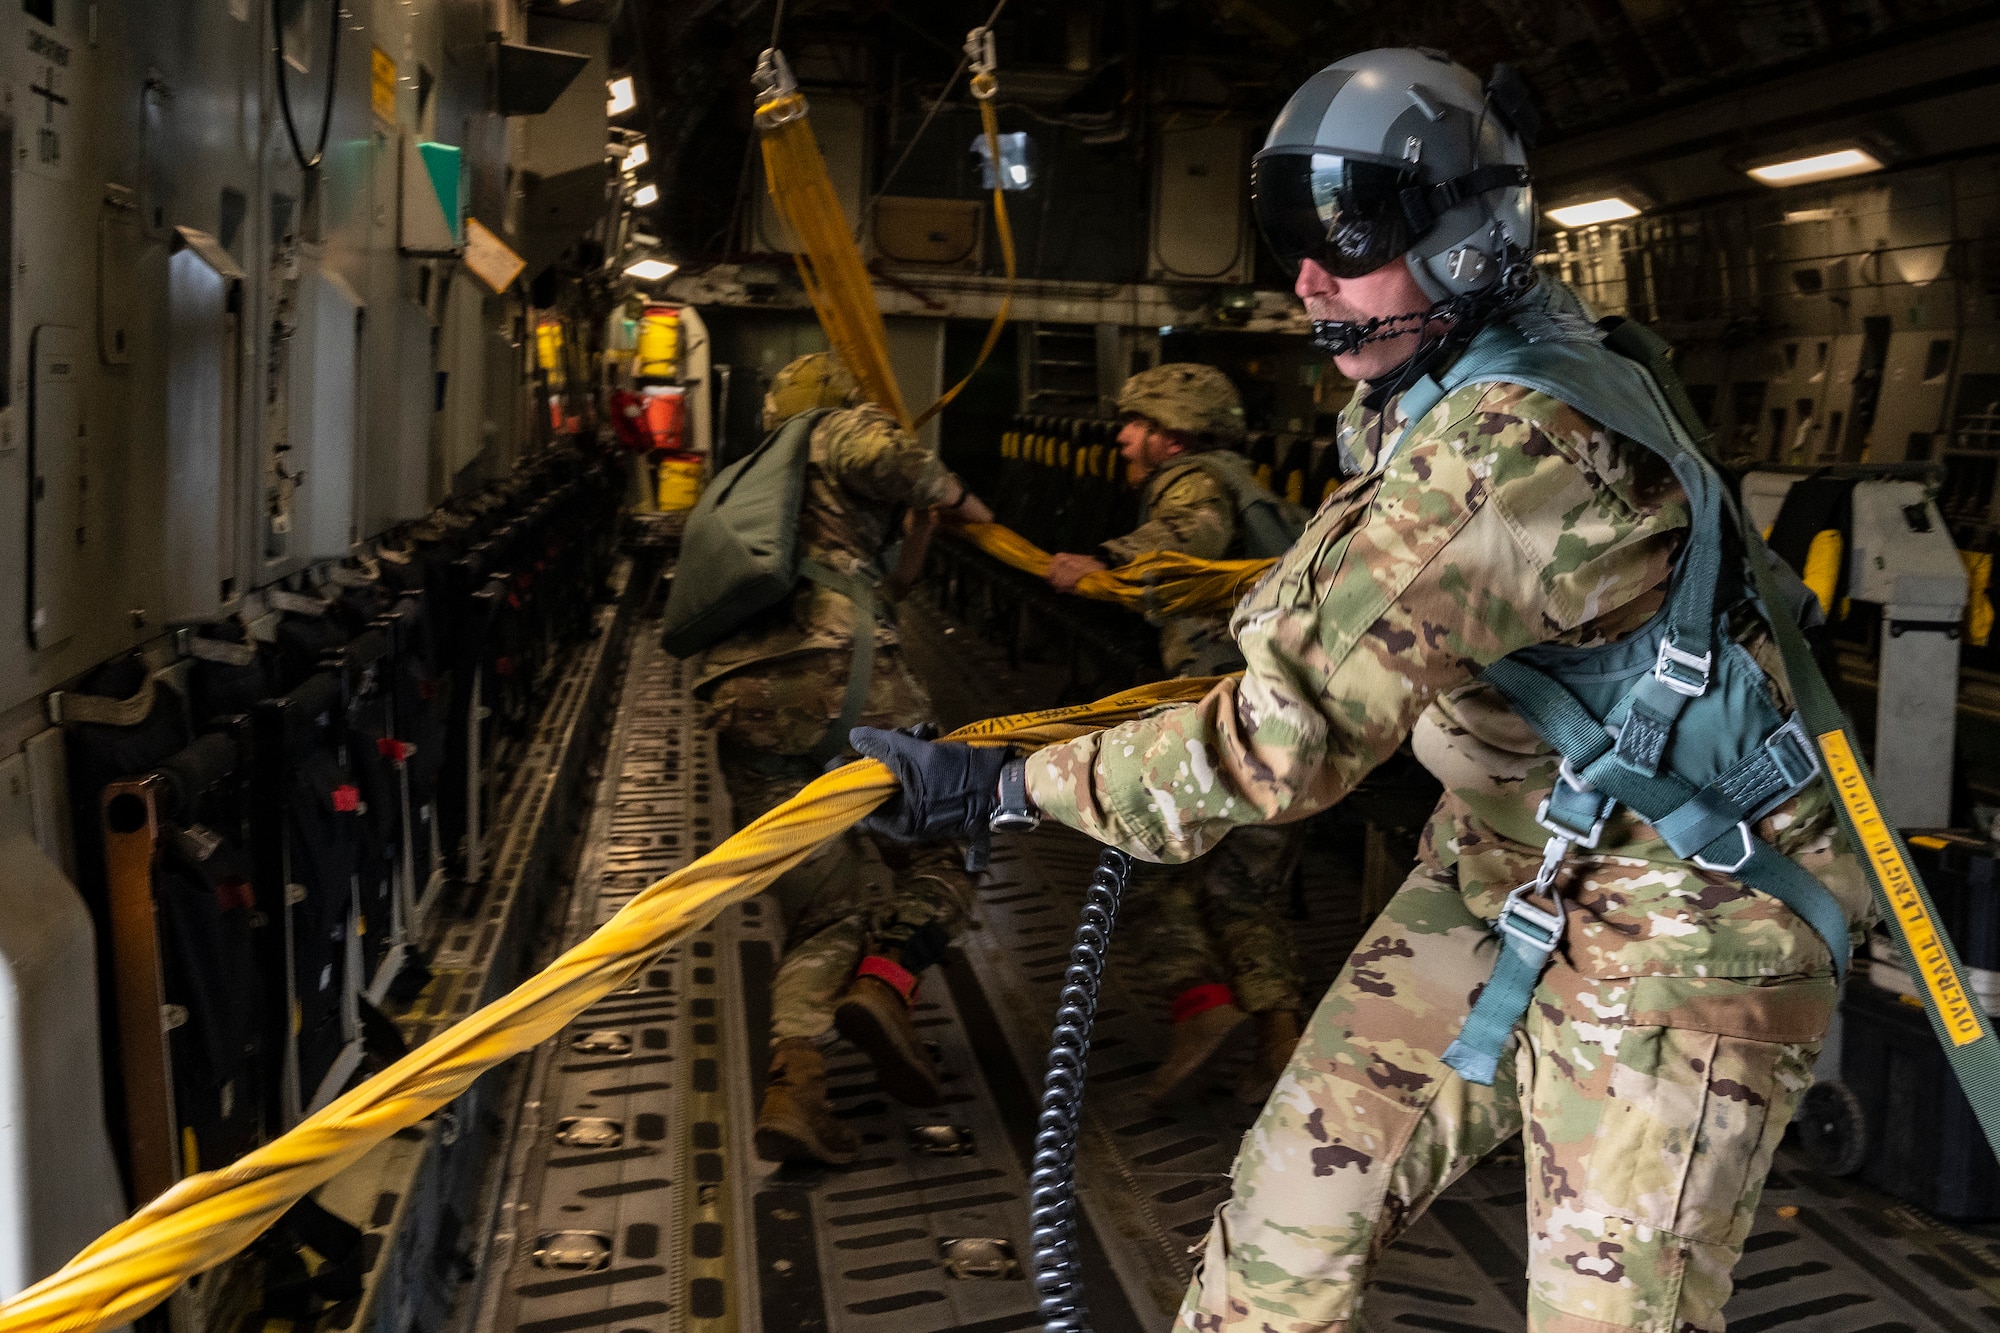 U.S. Air Force Master Sgt. Norman Metz, 517th Airlift Squadron loadmaster and U.S. Army jumpmasters, pull static lines back into the aircraft over Allen Army Airfield, Fort Greely, June 15, 2022 during RED FLAG-Alaska 22-2.  The static line is a cord attached at one end of the aircraft and at the other to the paratrooper’s parachute container. RF-A provides realistic combat training by integrating joint, coalition and multilateral forces into simulated forward operating bases. (U.S. Air Force photo by Sheila deVera)